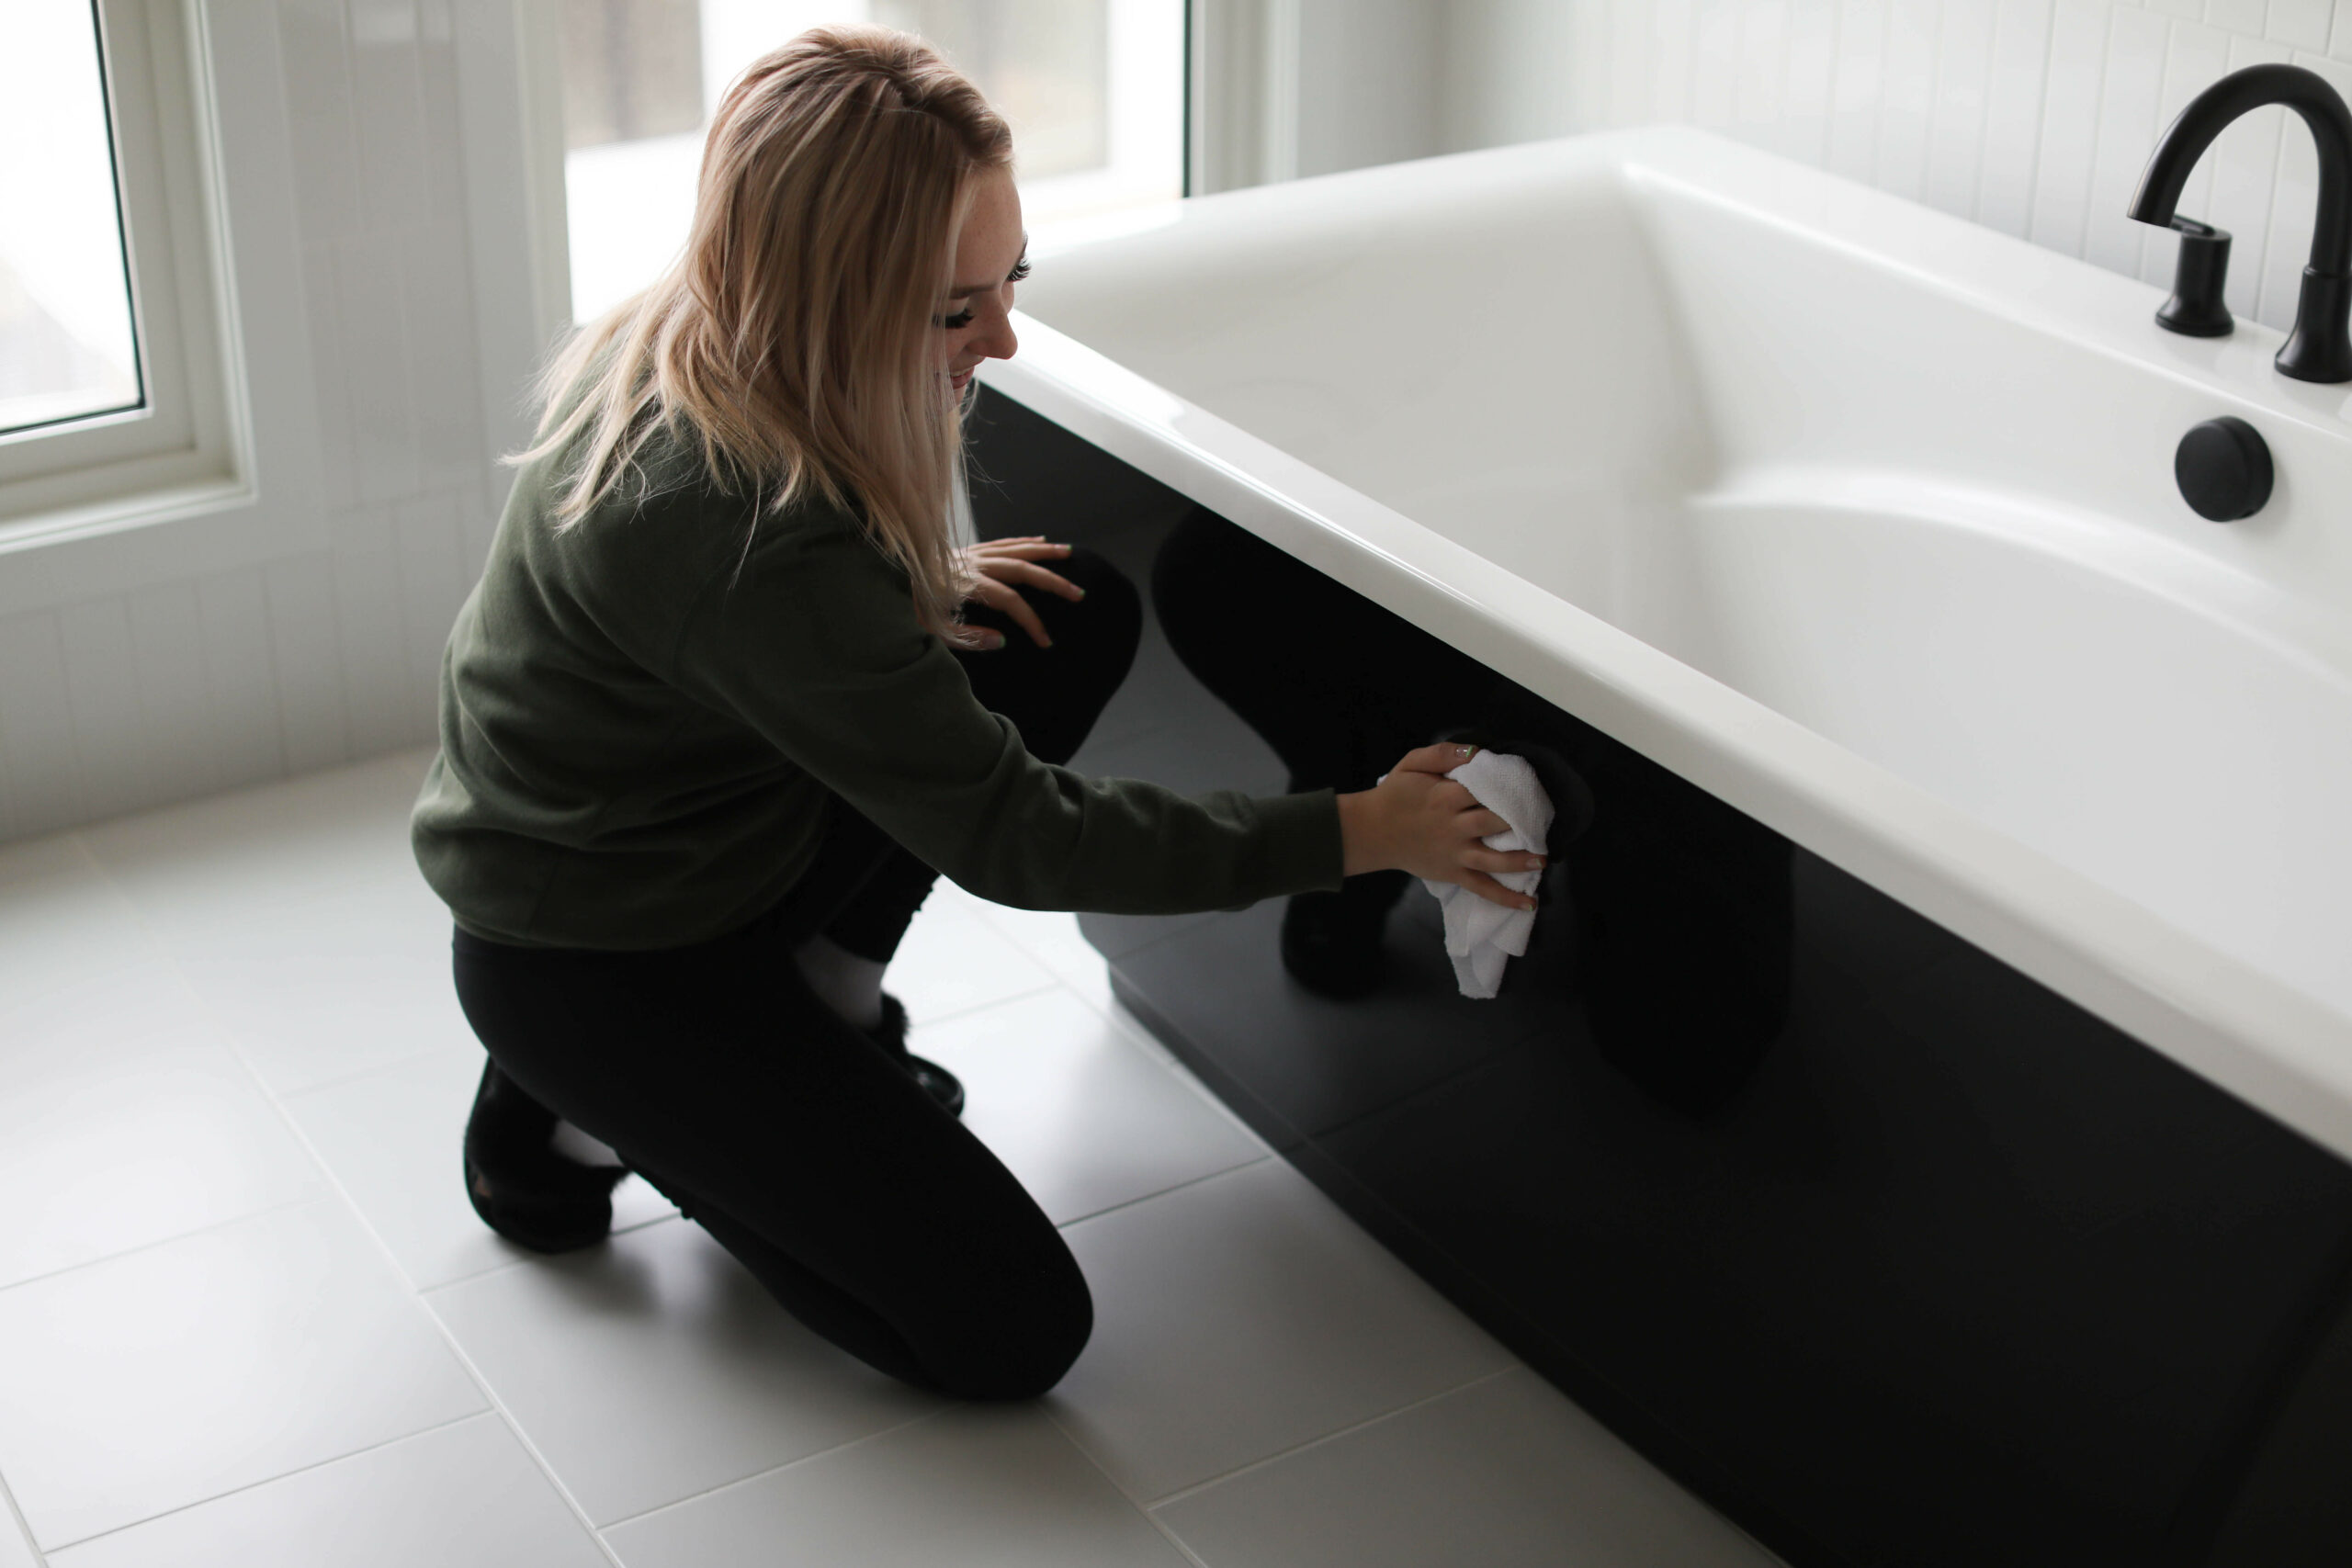 Bathroom Cleaning Secrets From the Pros